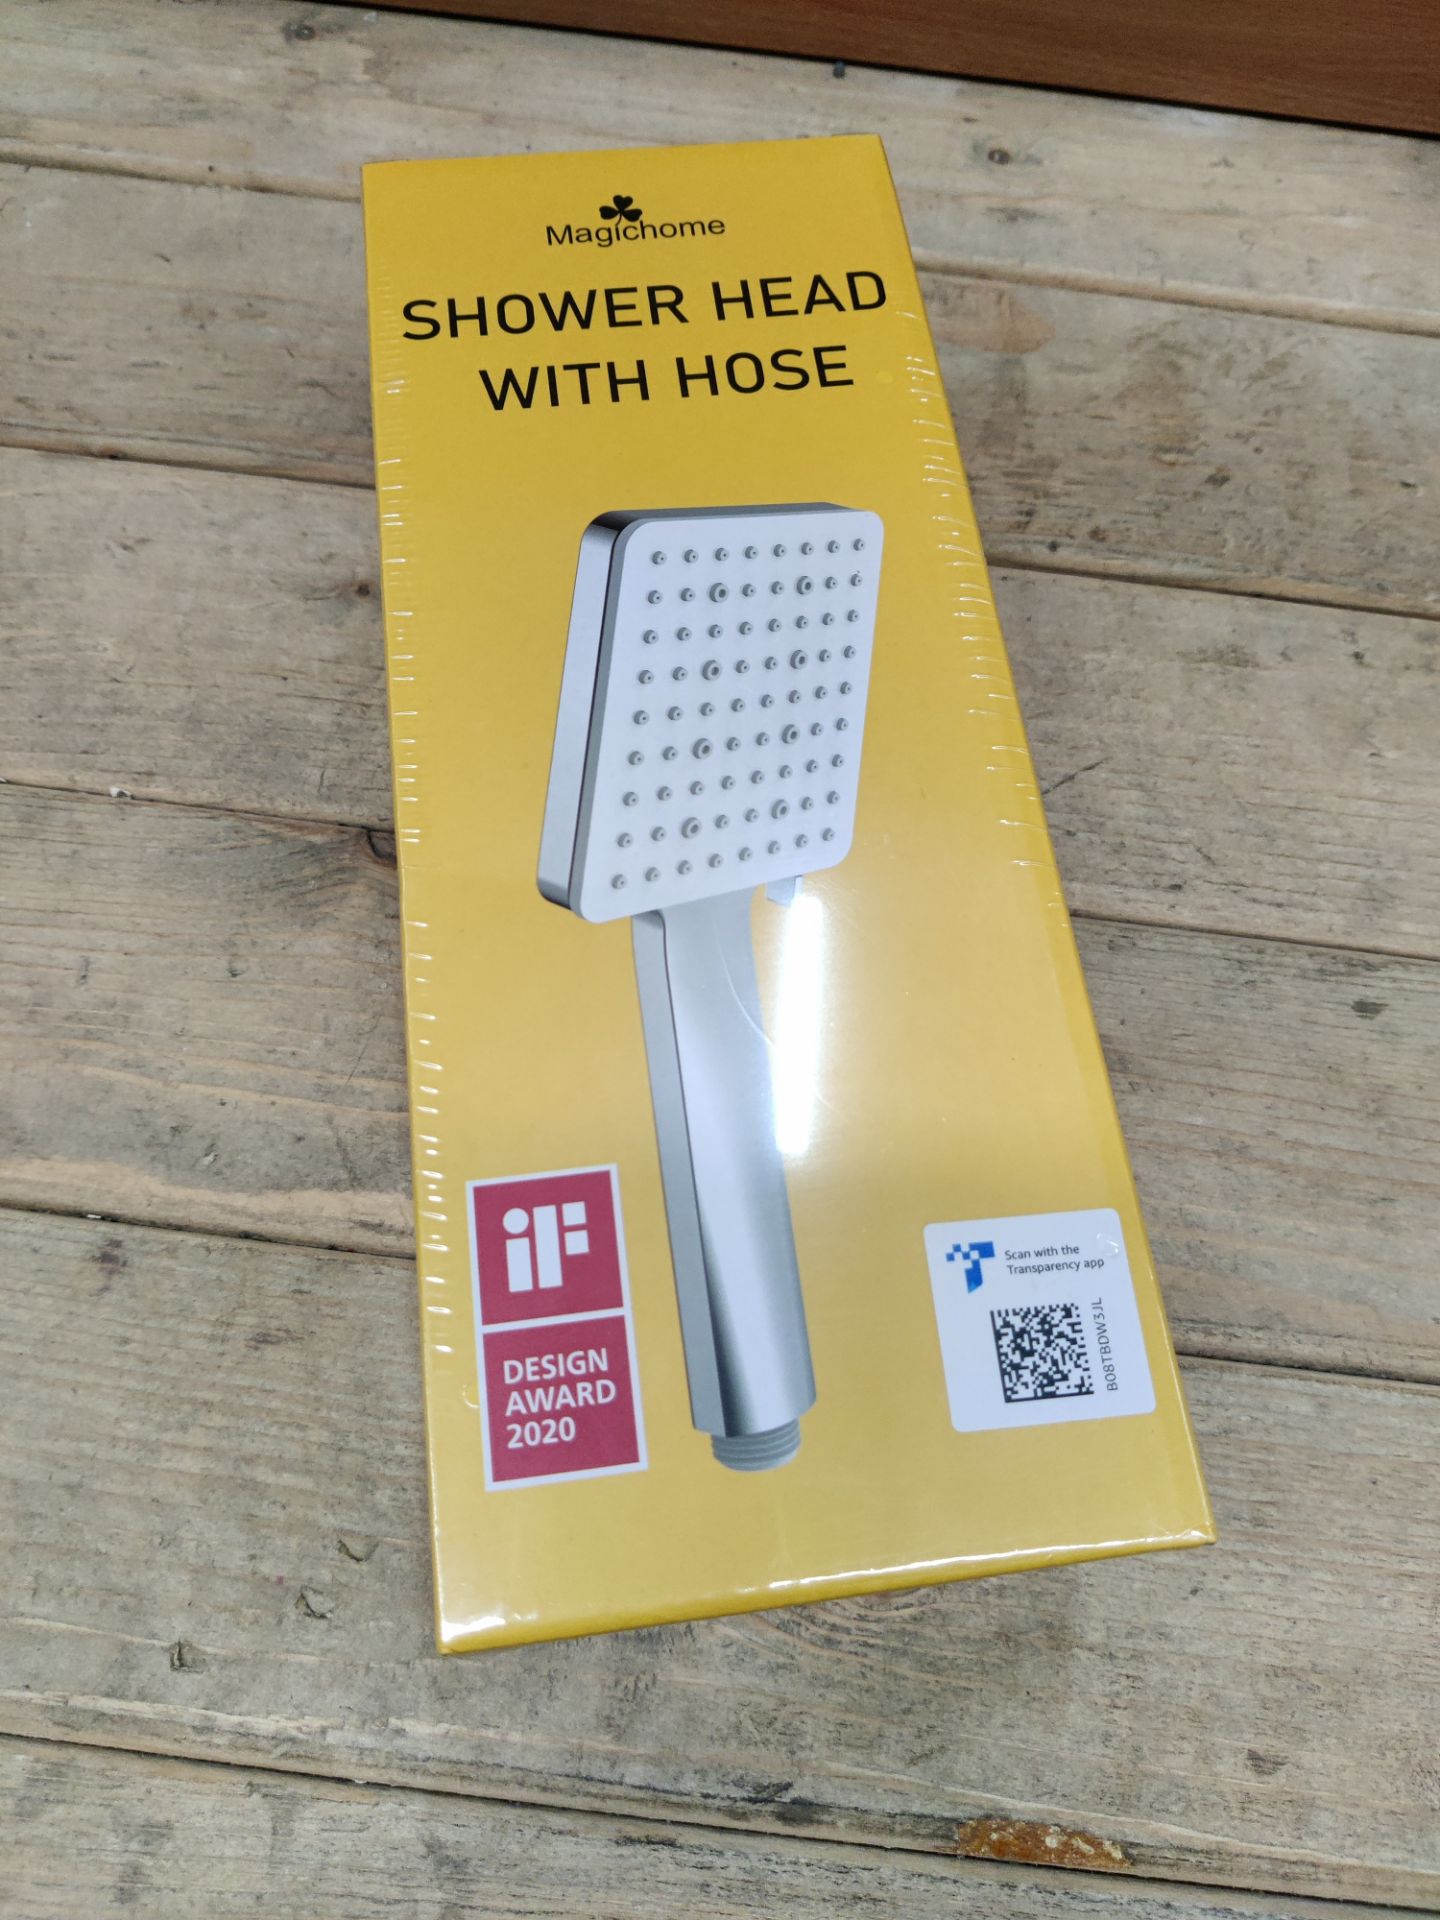 RRP £20.34 Magichome Shower Head and Hose - Image 2 of 2